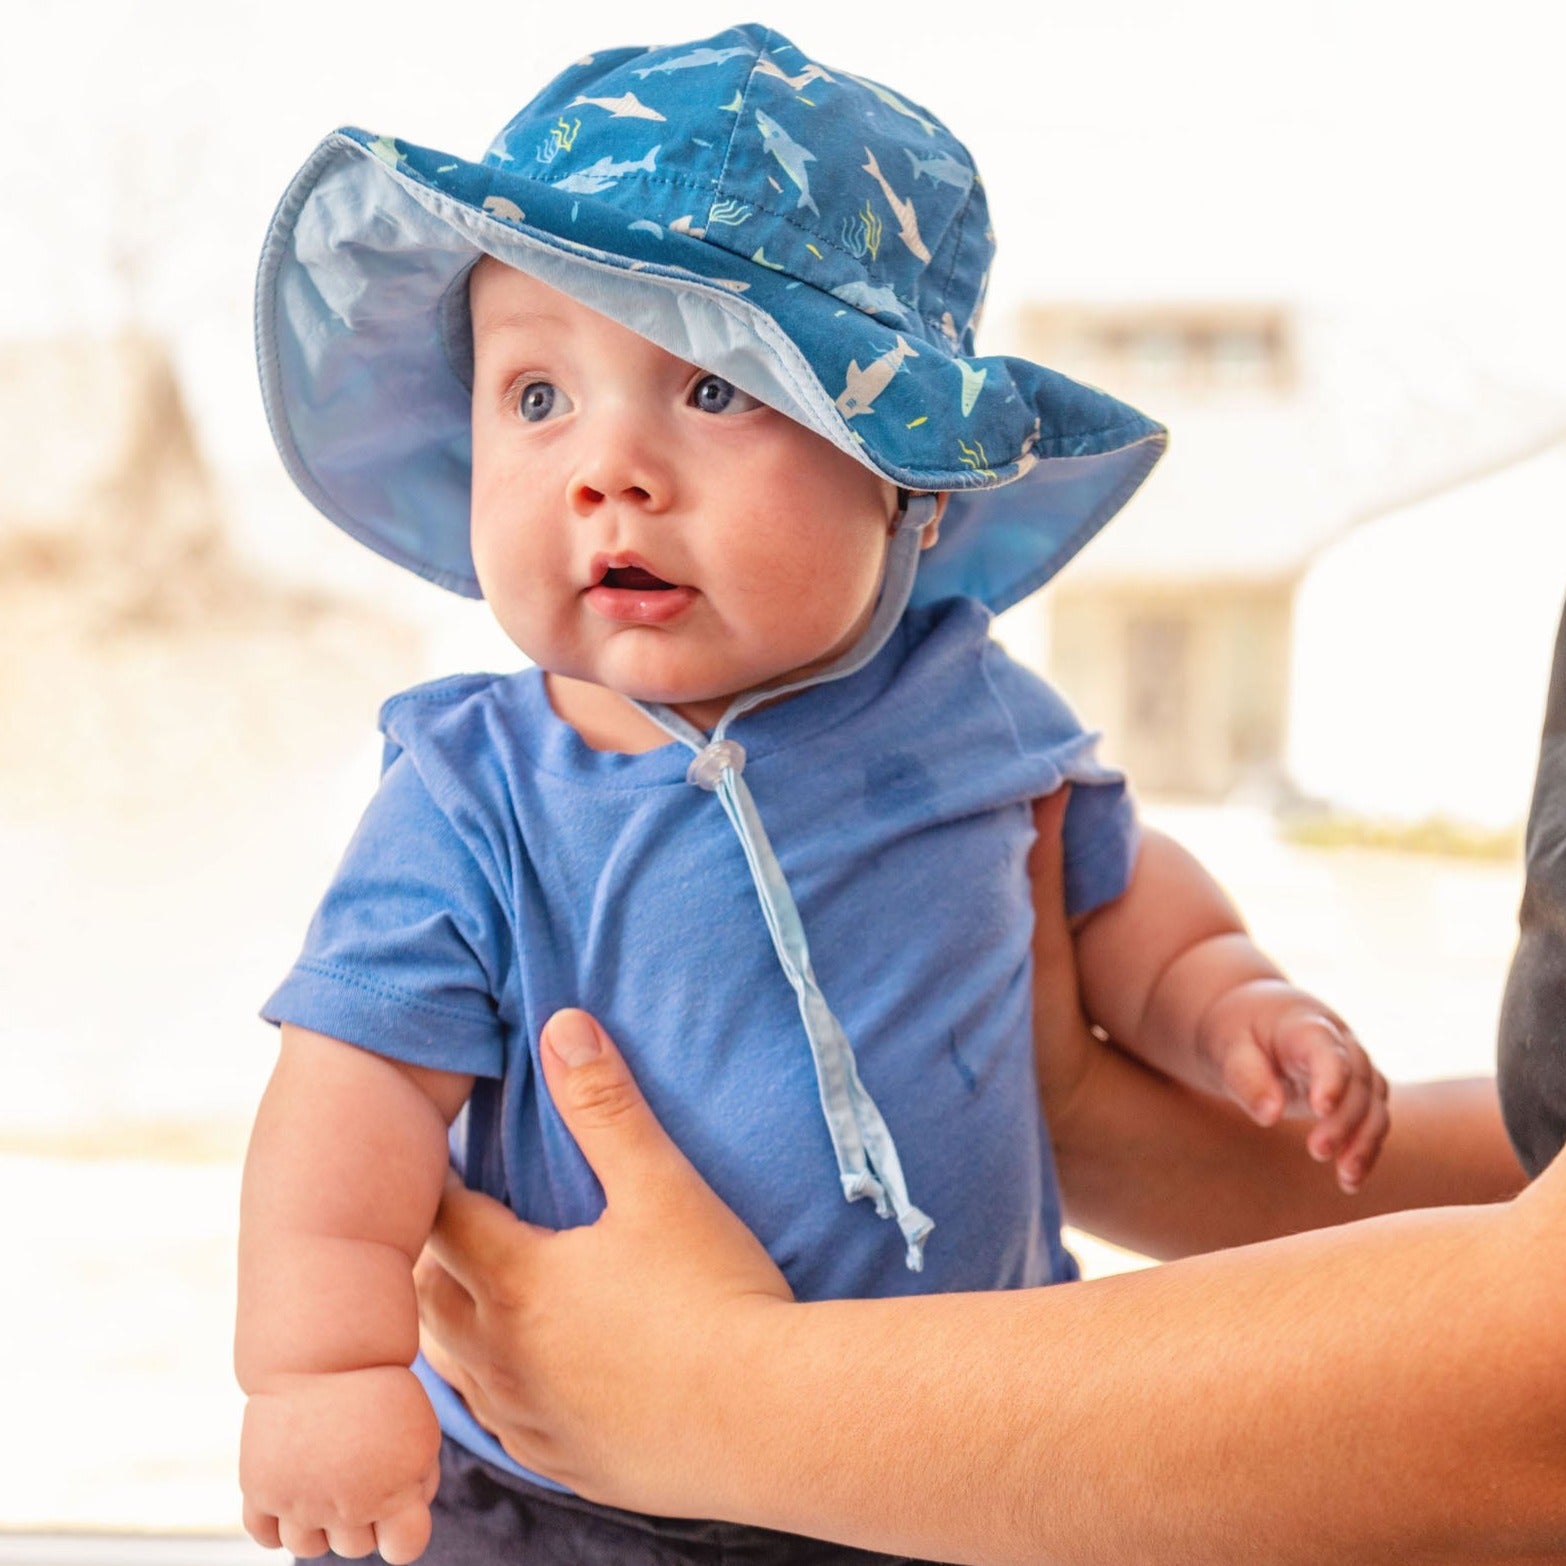 Sun Hats - Baby, Infant, and Toddler Sun Hats